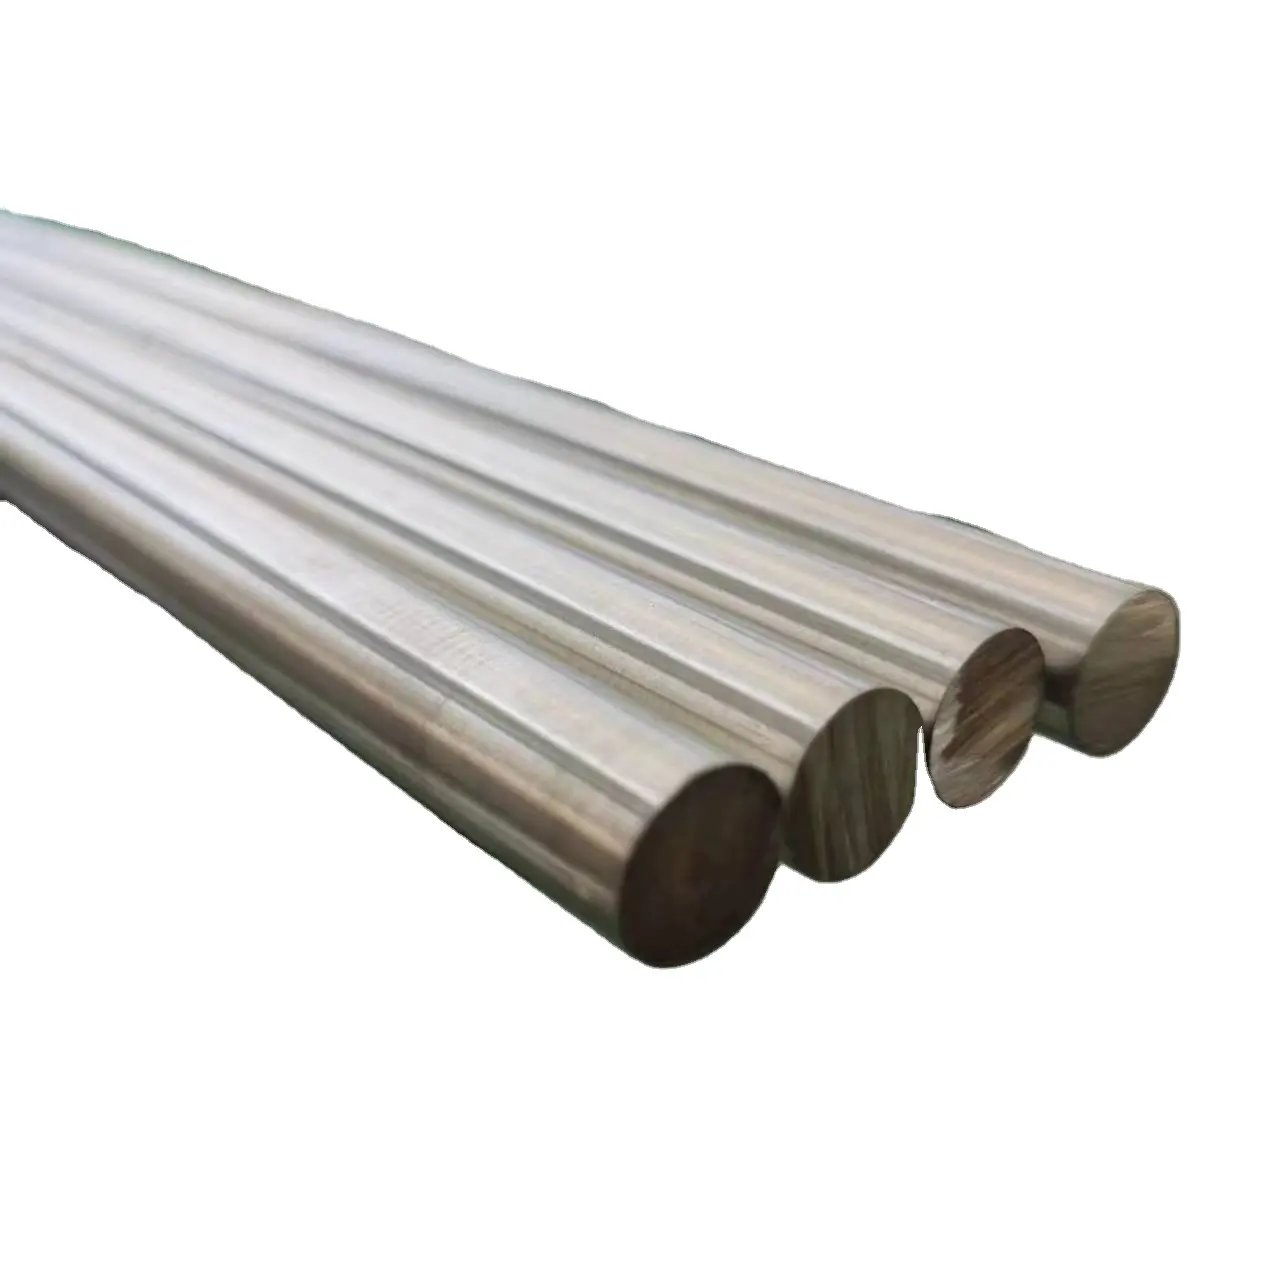 Chinese Manufacturers stainless steel bars Wholesale Custom stainless steel round bar Custom Design stainless steel bars